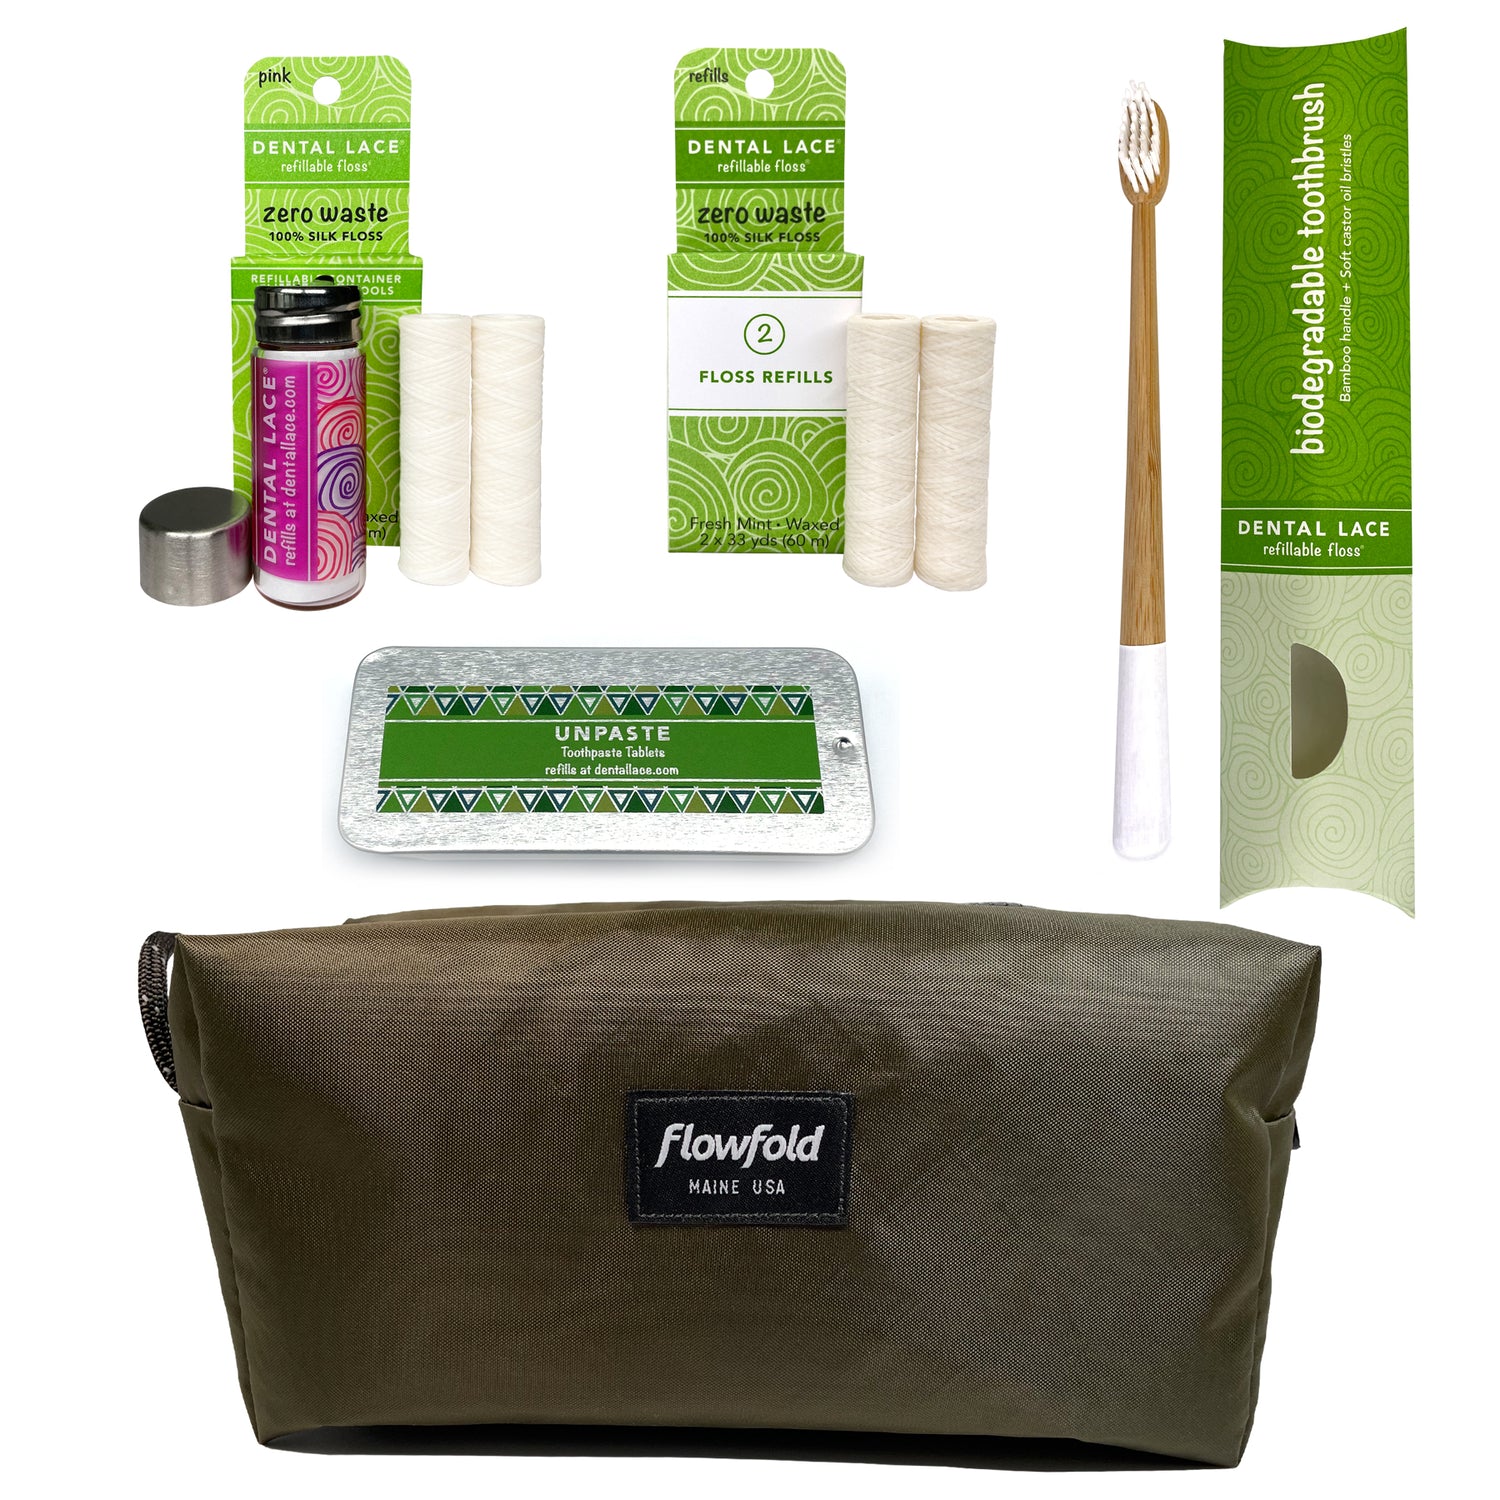 Flowfold Dopp Bag with Dental Lace Products